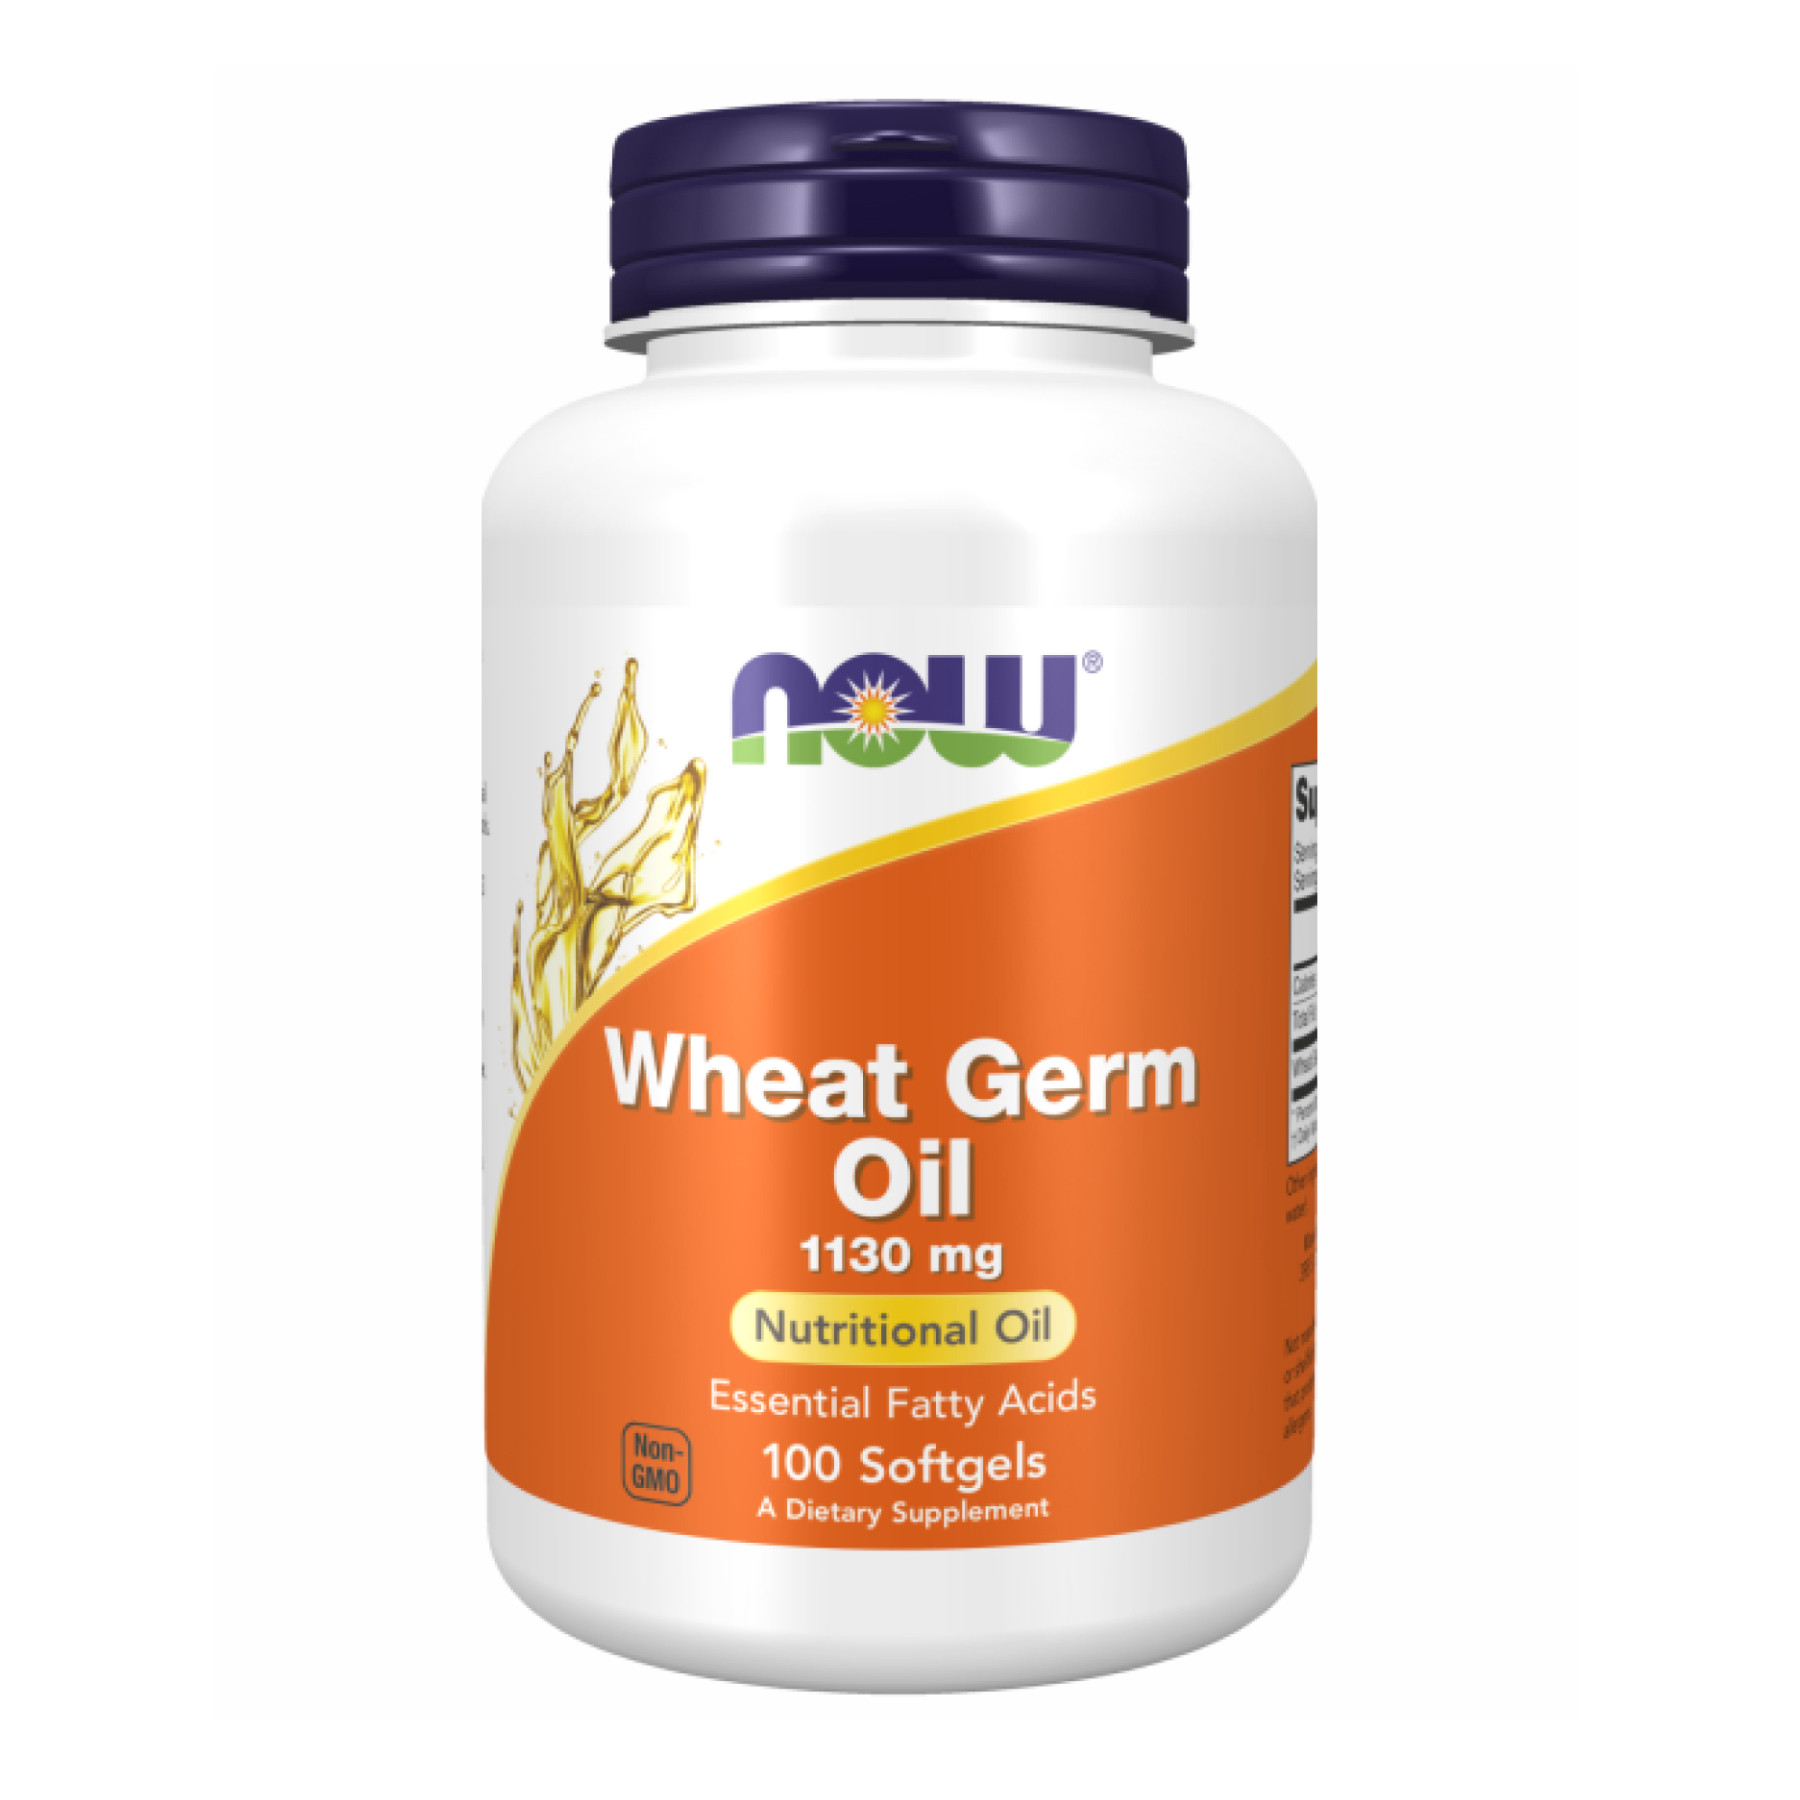 Софт гелеві капсули Wheat Germ Oil 1130mg - 100 sgels 2022-10-2387